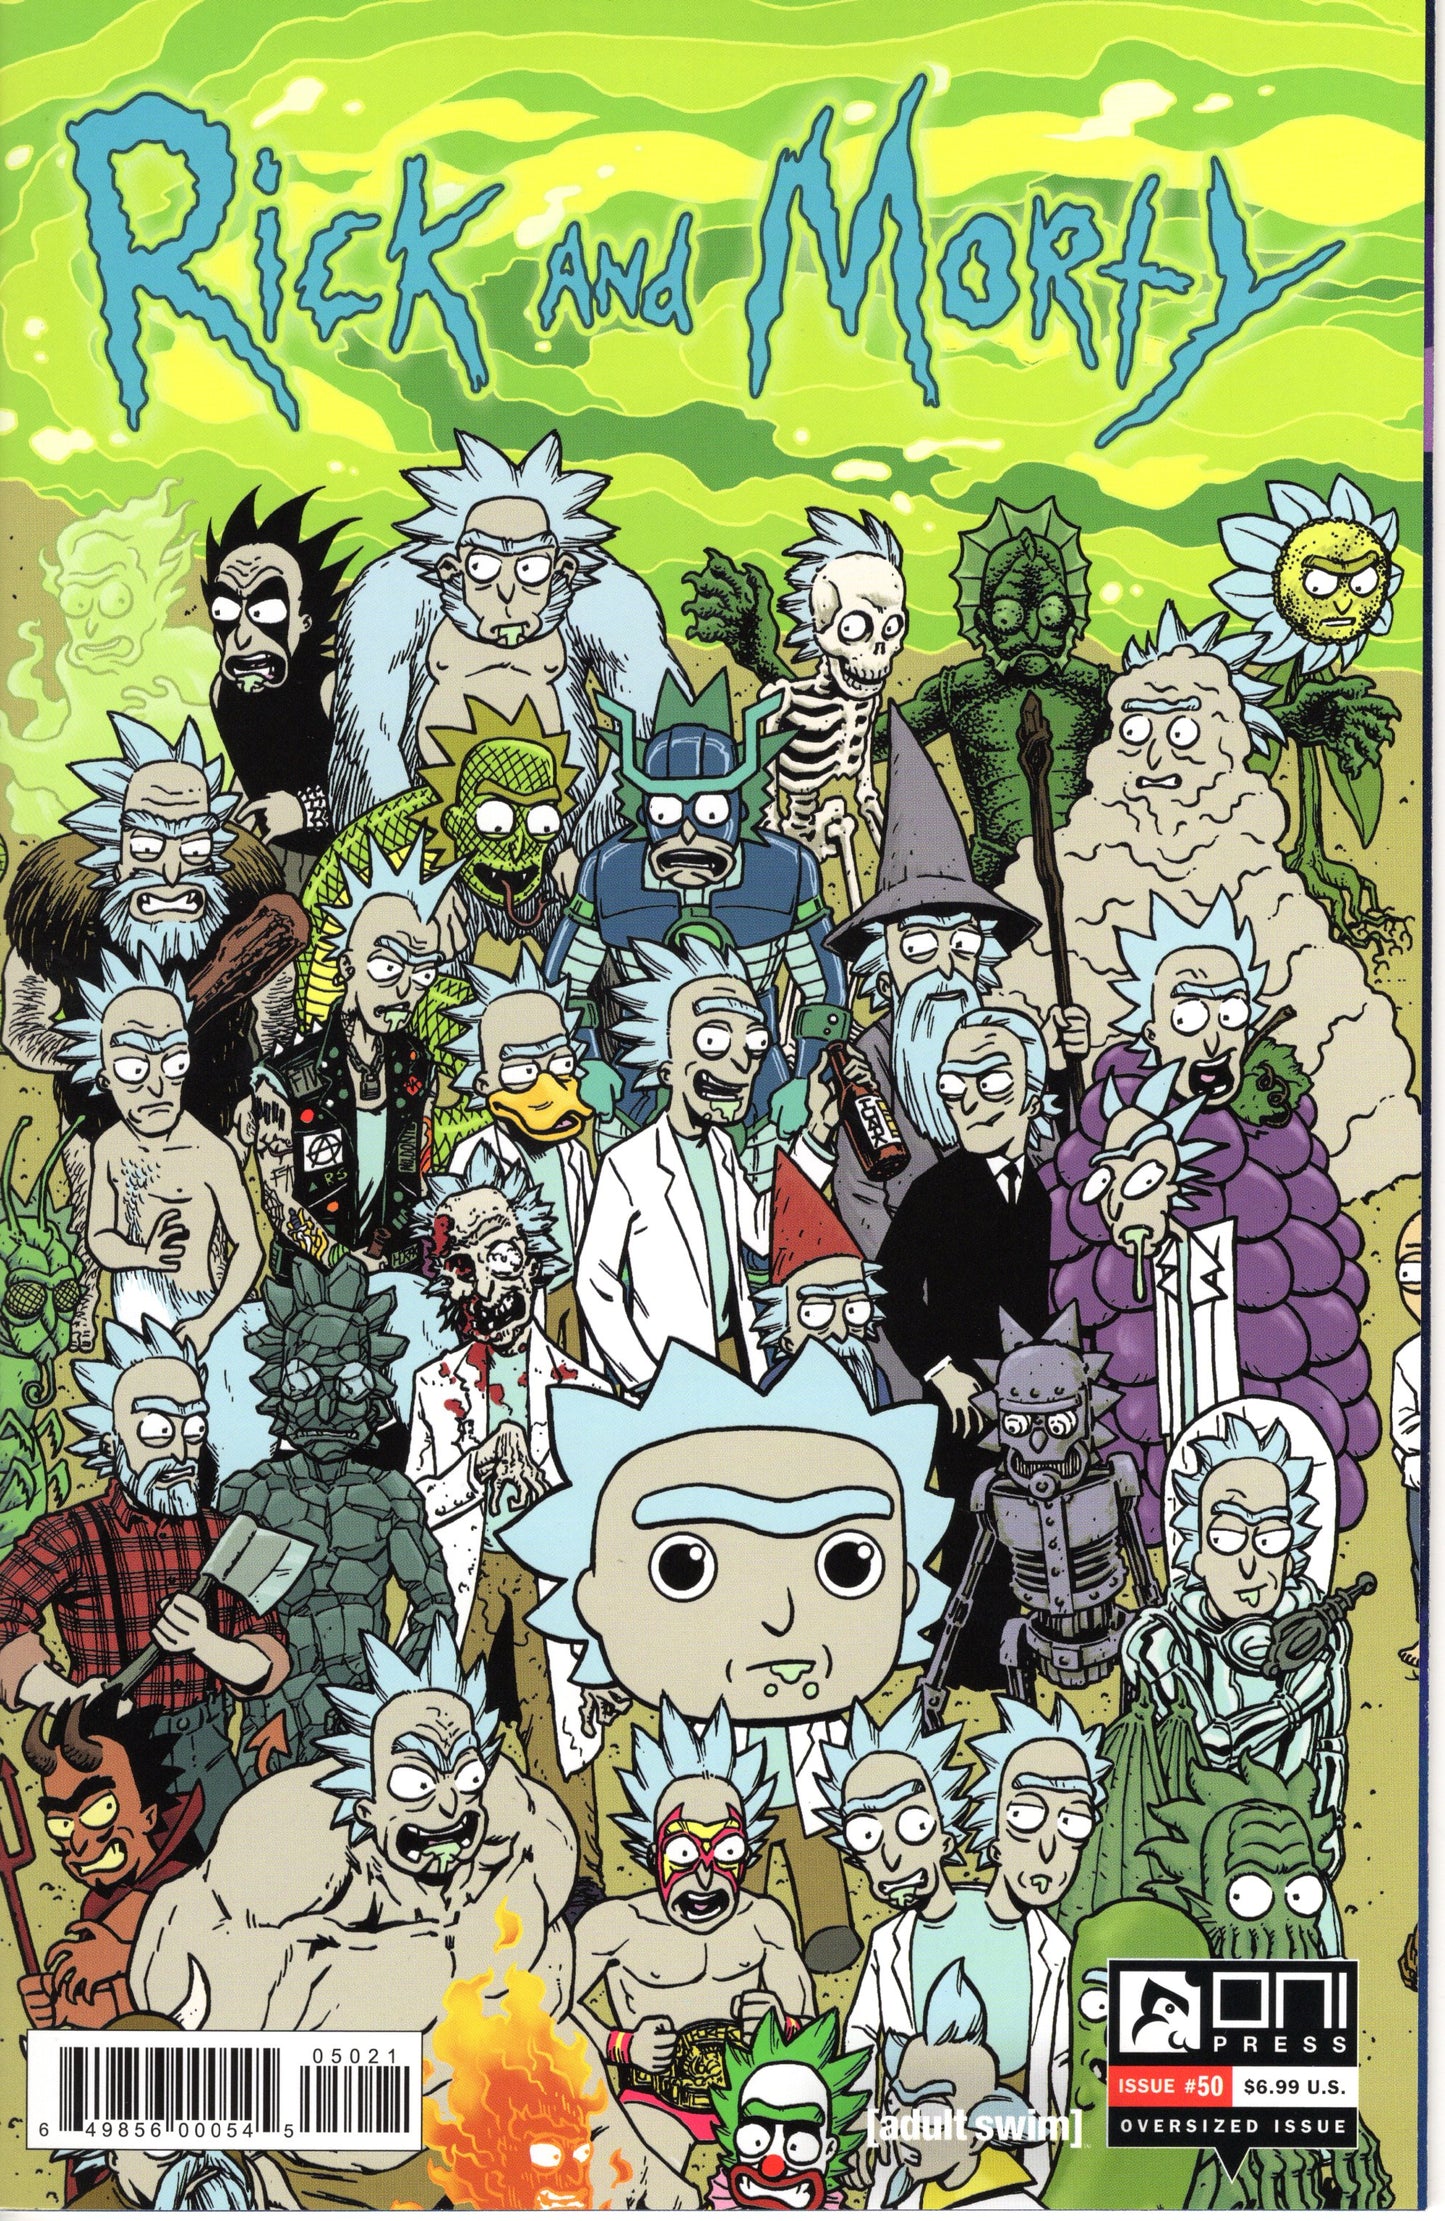 Rick and Morty - Issue #50 "Variant Cover" (May, 2019 - Oni Press) VF/NM